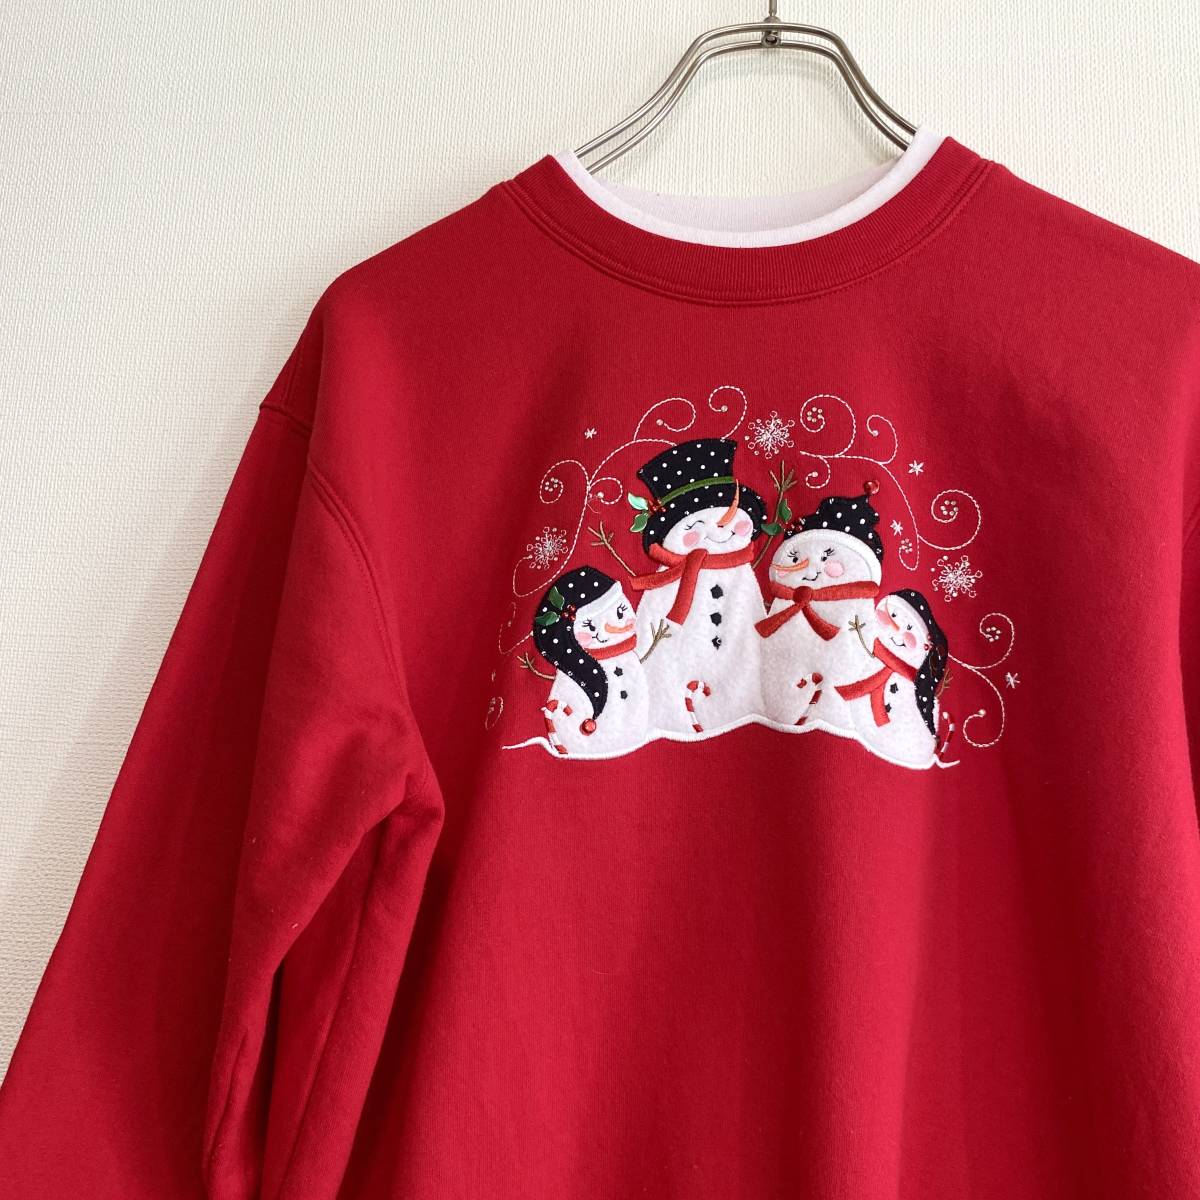  America old clothes snow ... embroidery sweatshirt sweat retro Vintage S size ....[R109]